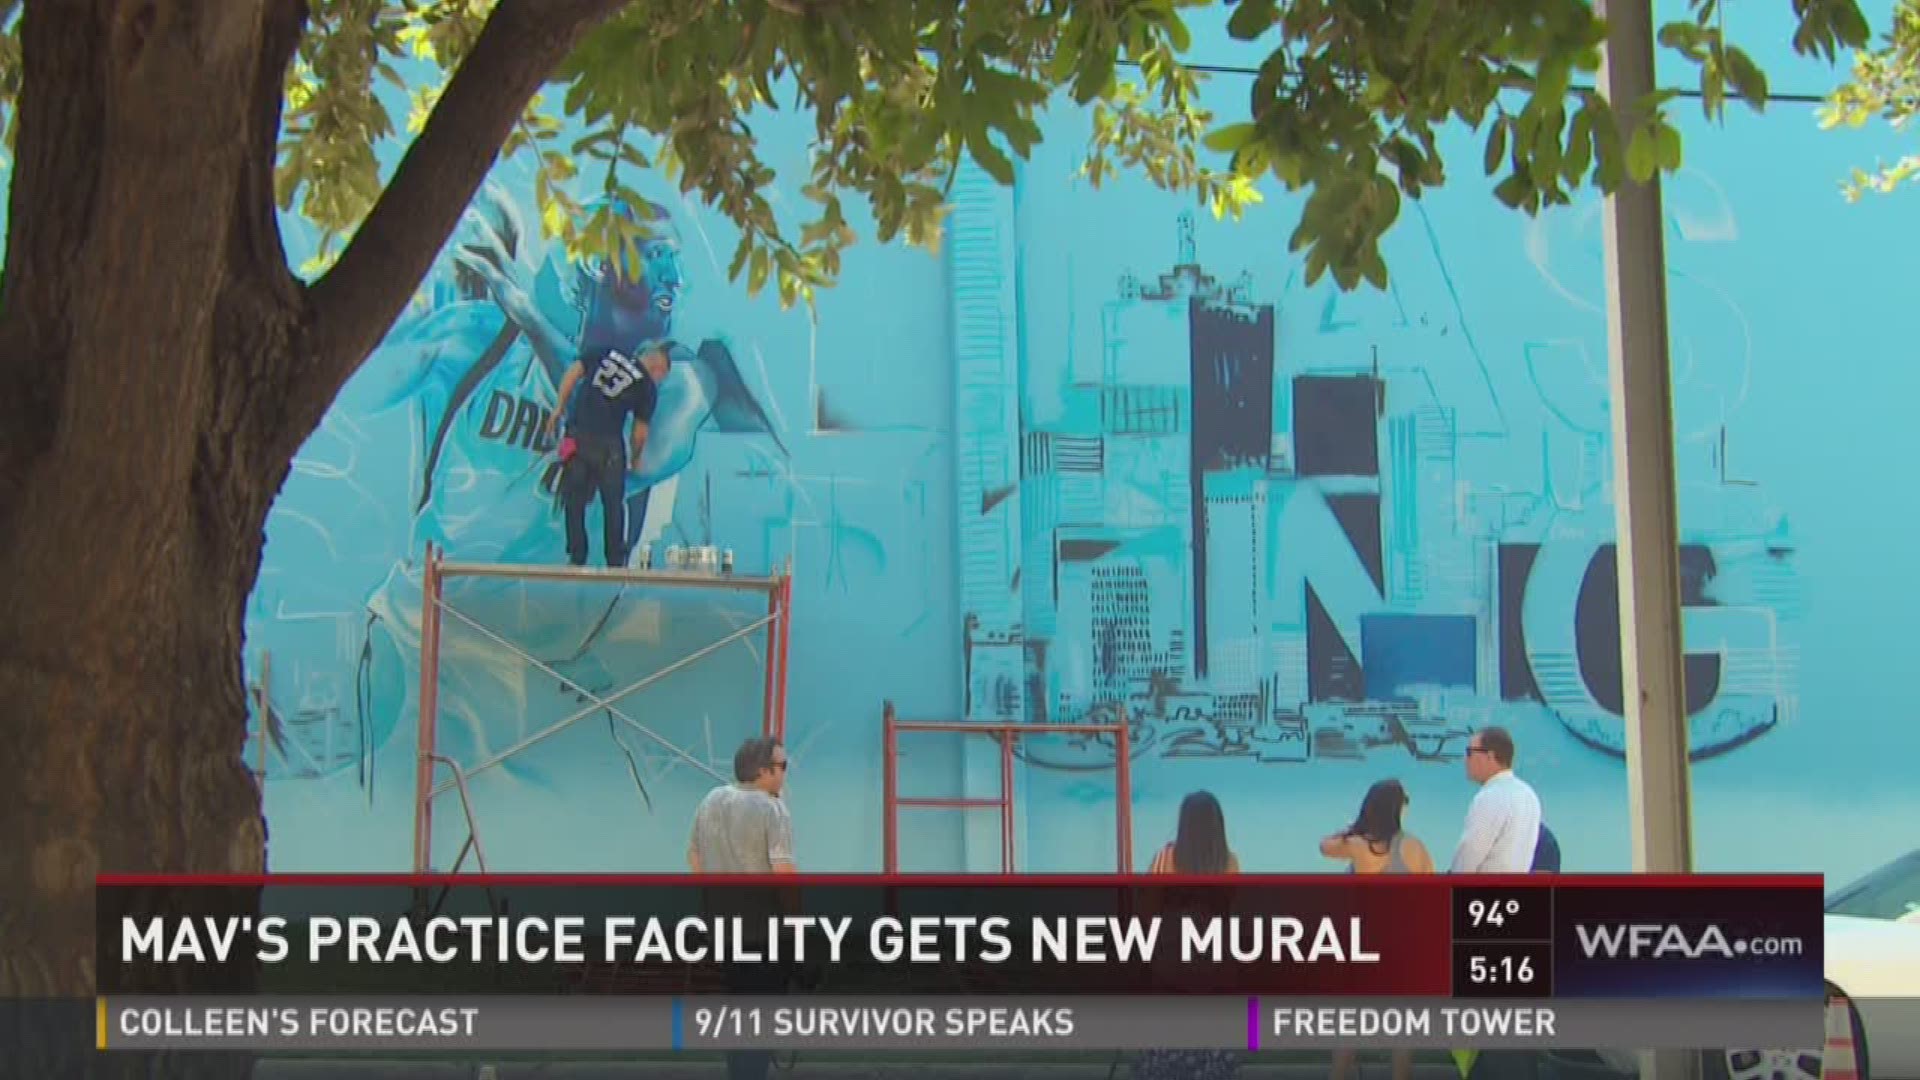 Mavs practice facility gets new mural